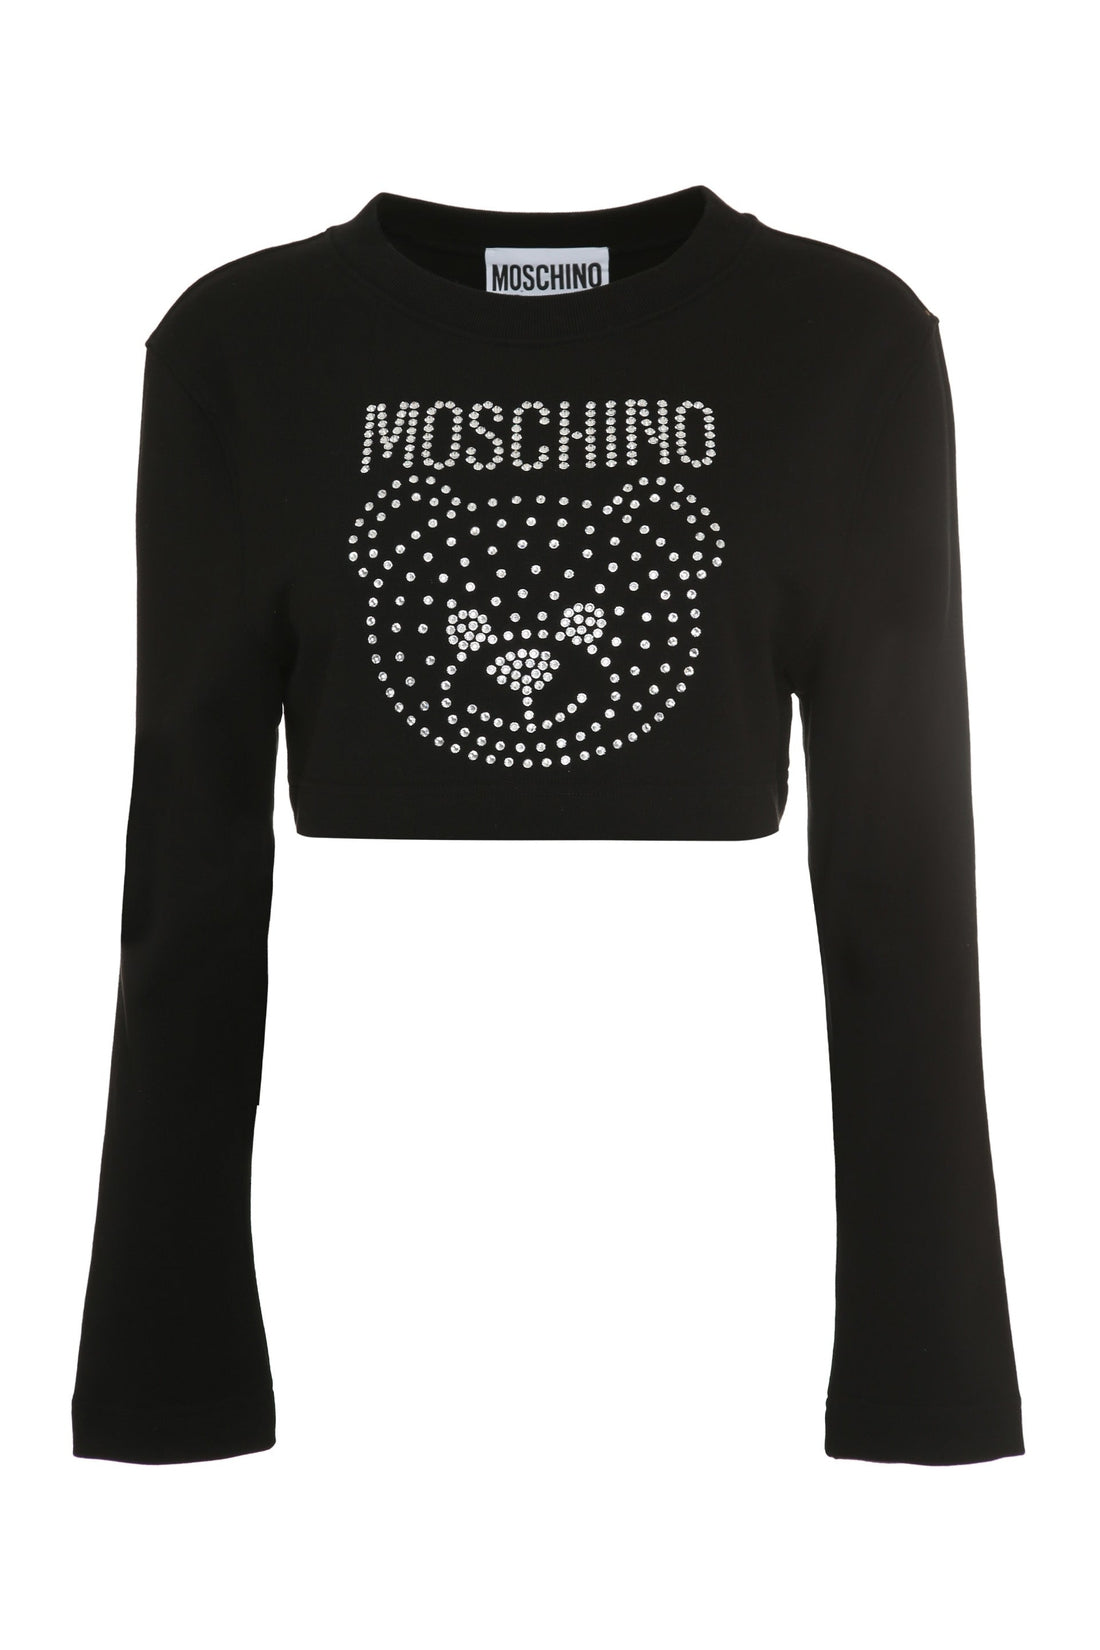 Moschino-OUTLET-SALE-Cropped cotton sweatshirt-ARCHIVIST